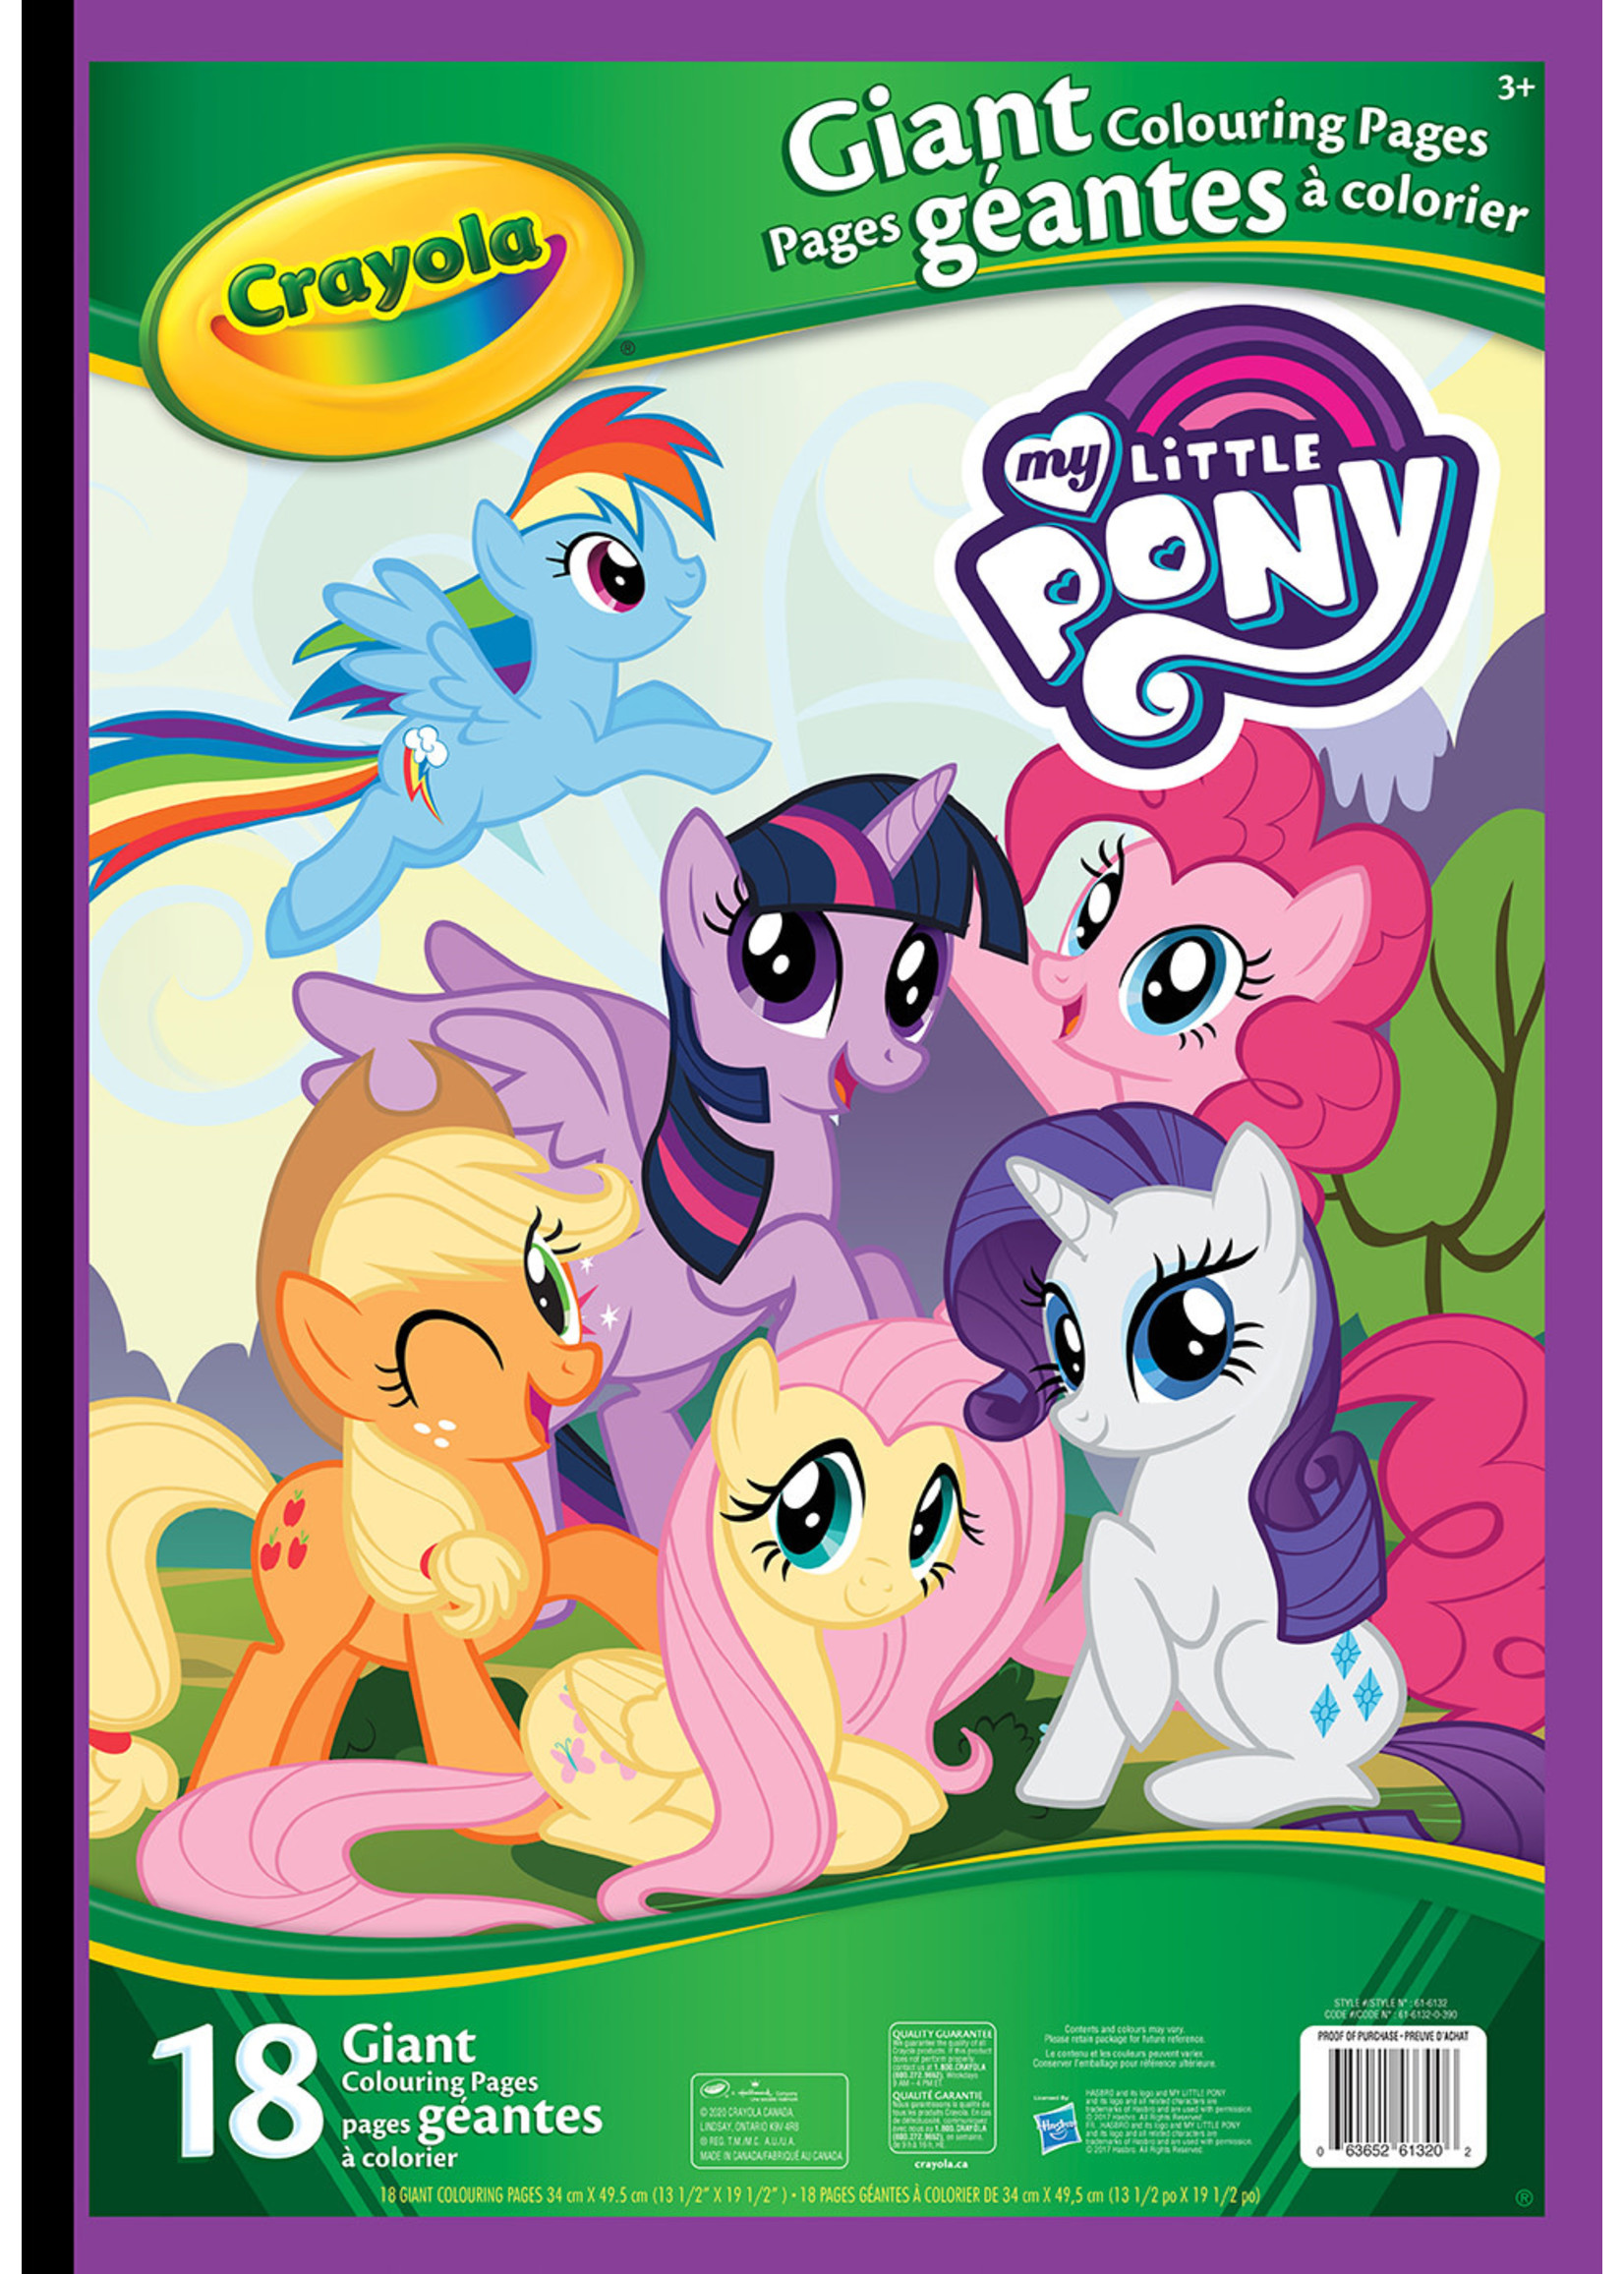 Crayola Giant colouring pages - My Little Pony